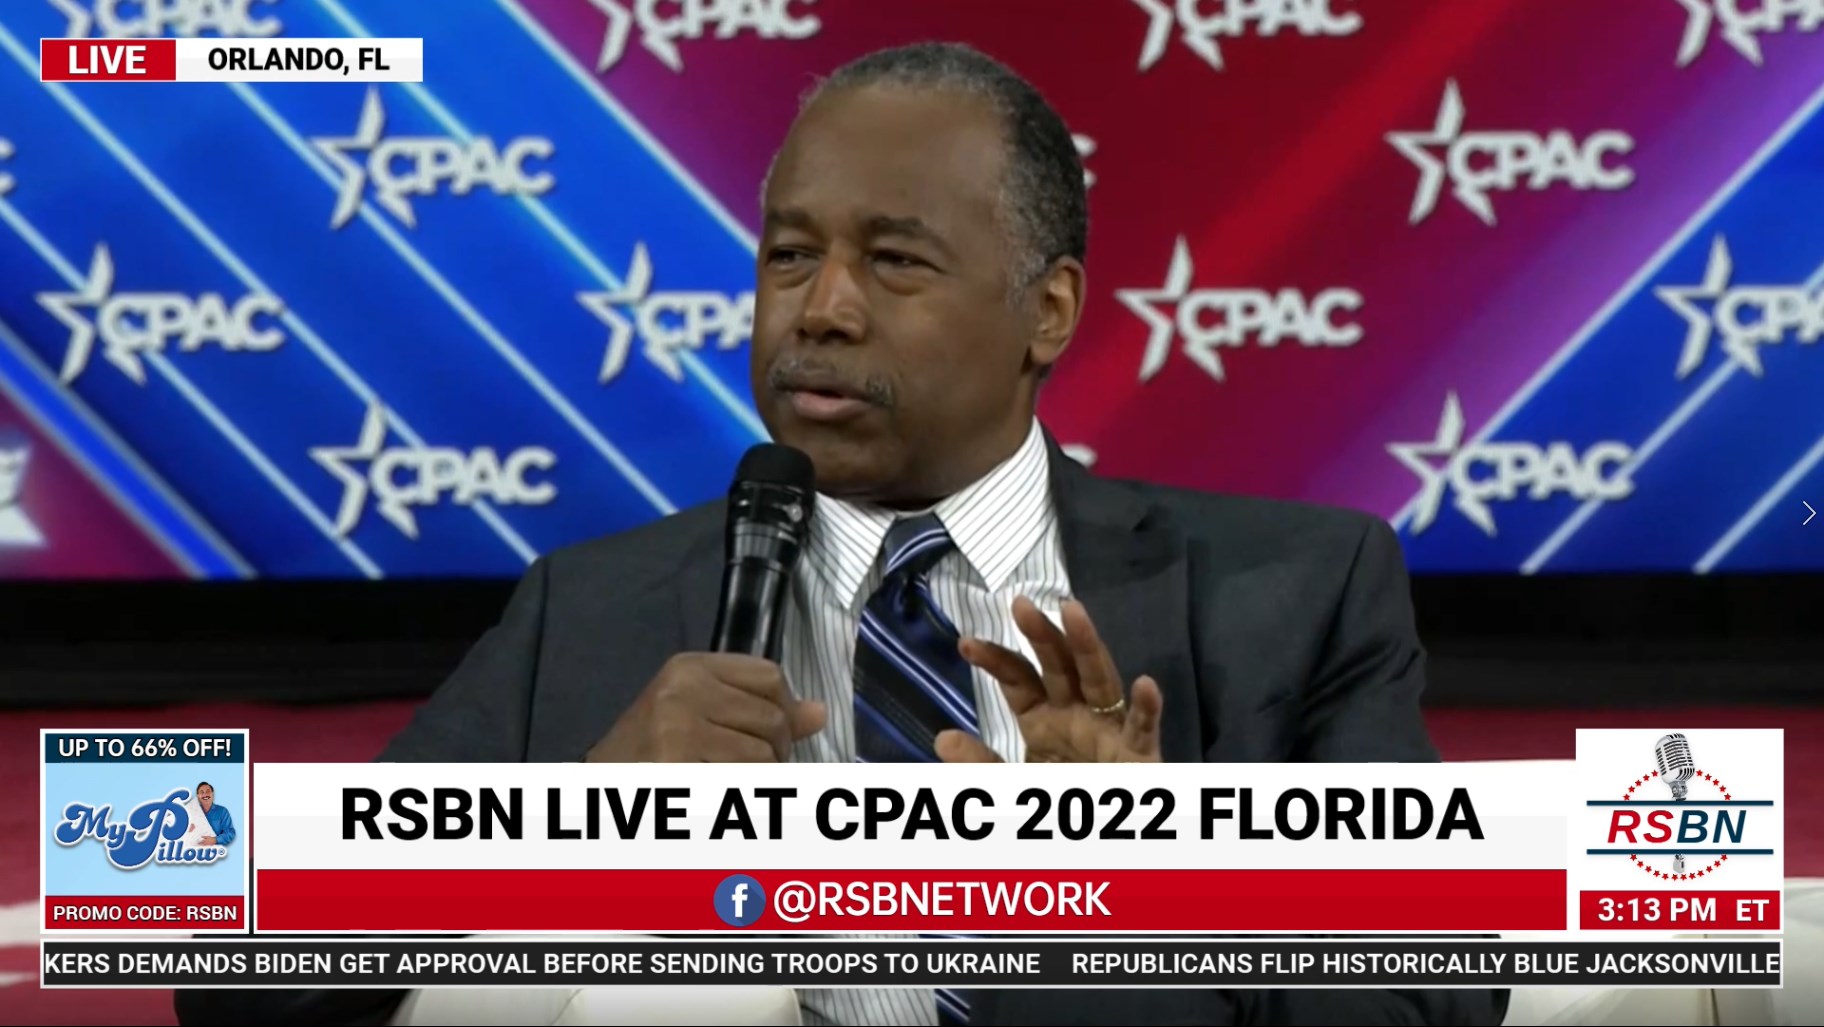 Dr. Ben Carson Full Remarks at CPAC 2022 in Orlando